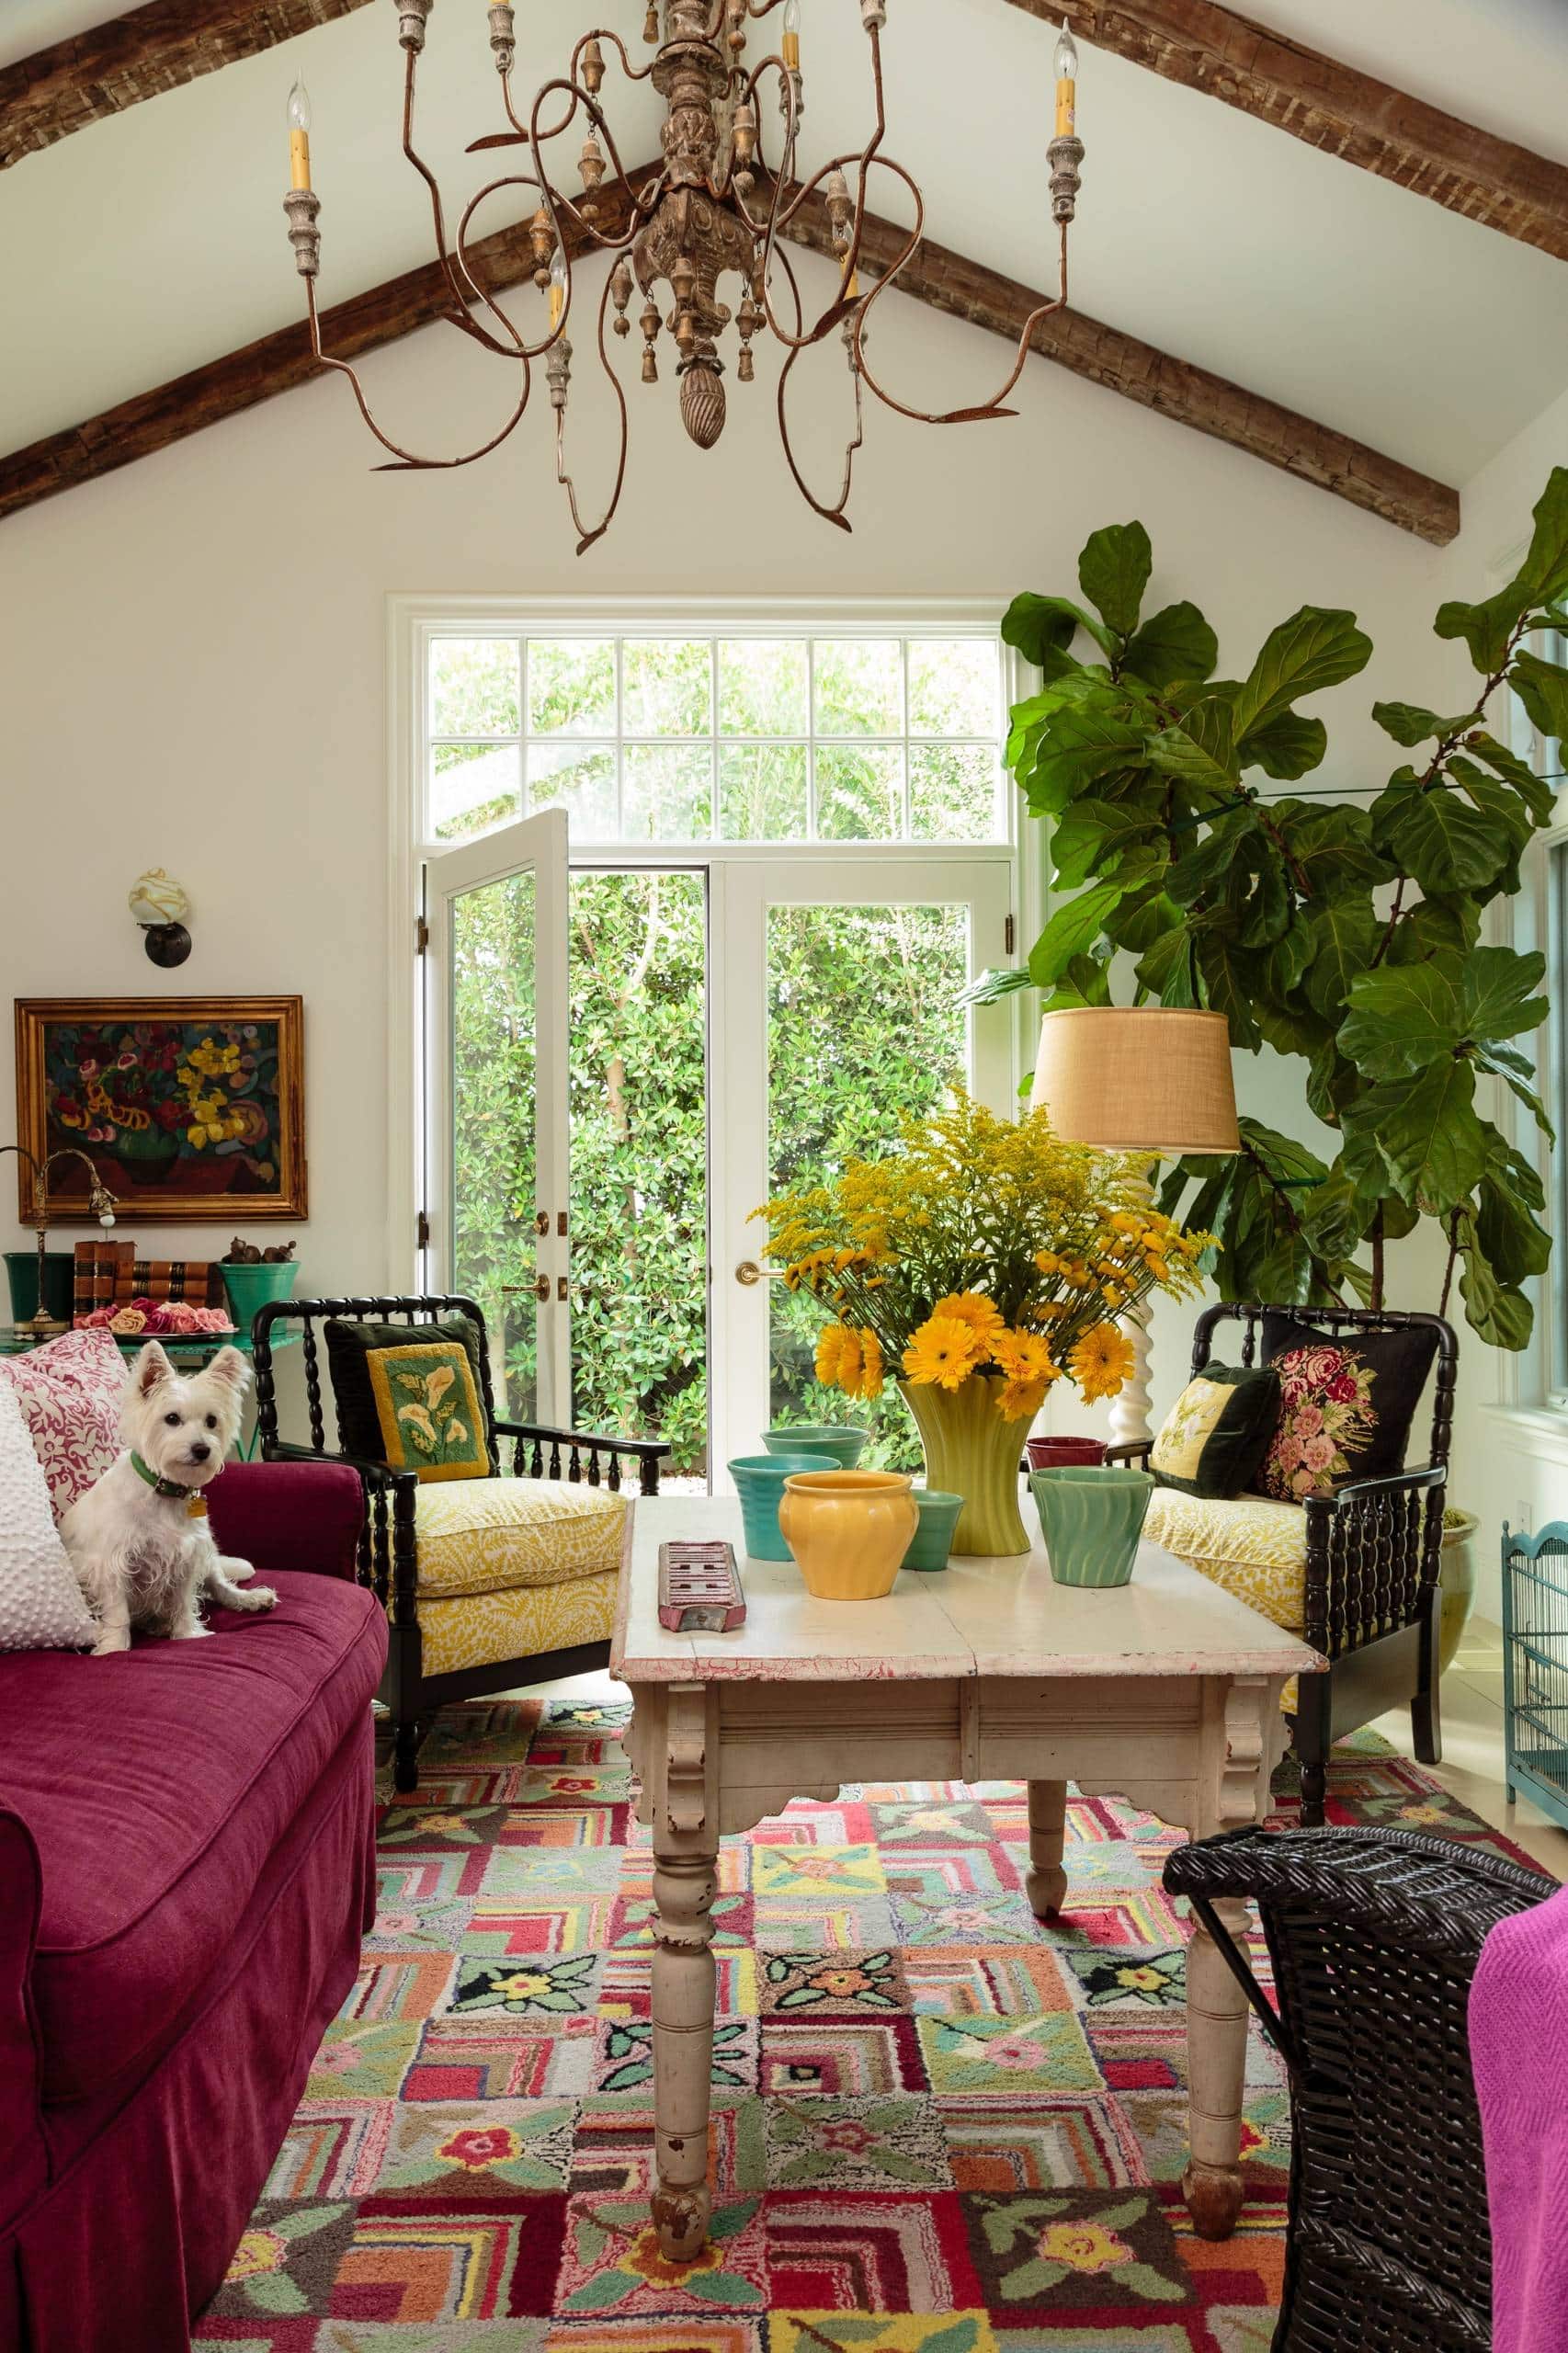 Living room in beach english cottage style featuring tropical plants